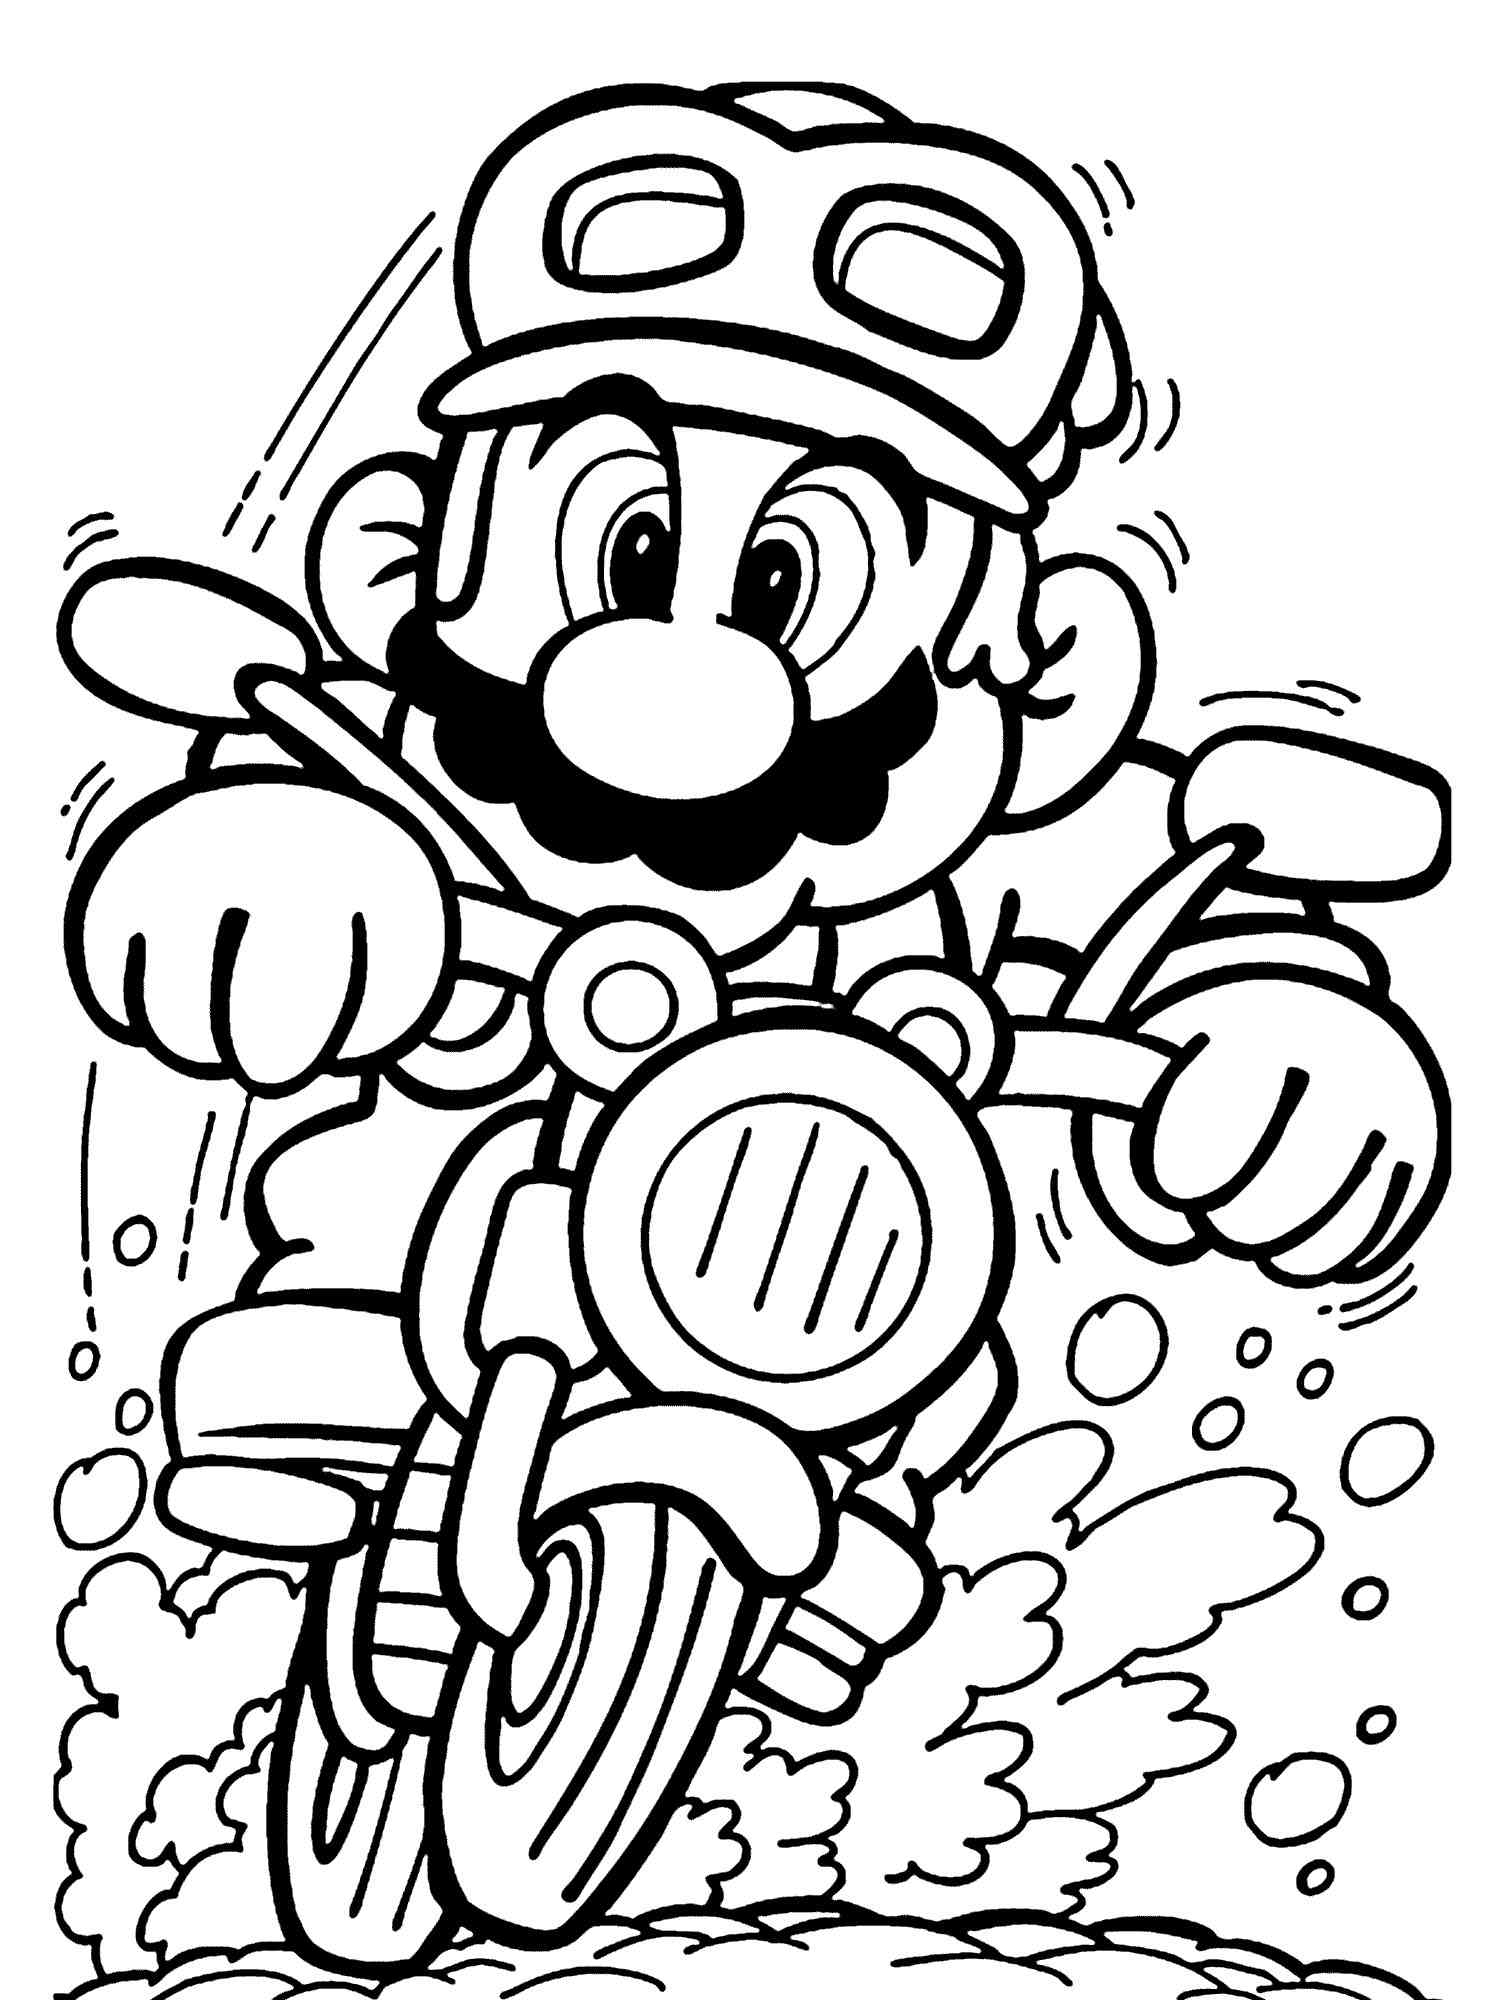 Mario on a motorcycle coloring page